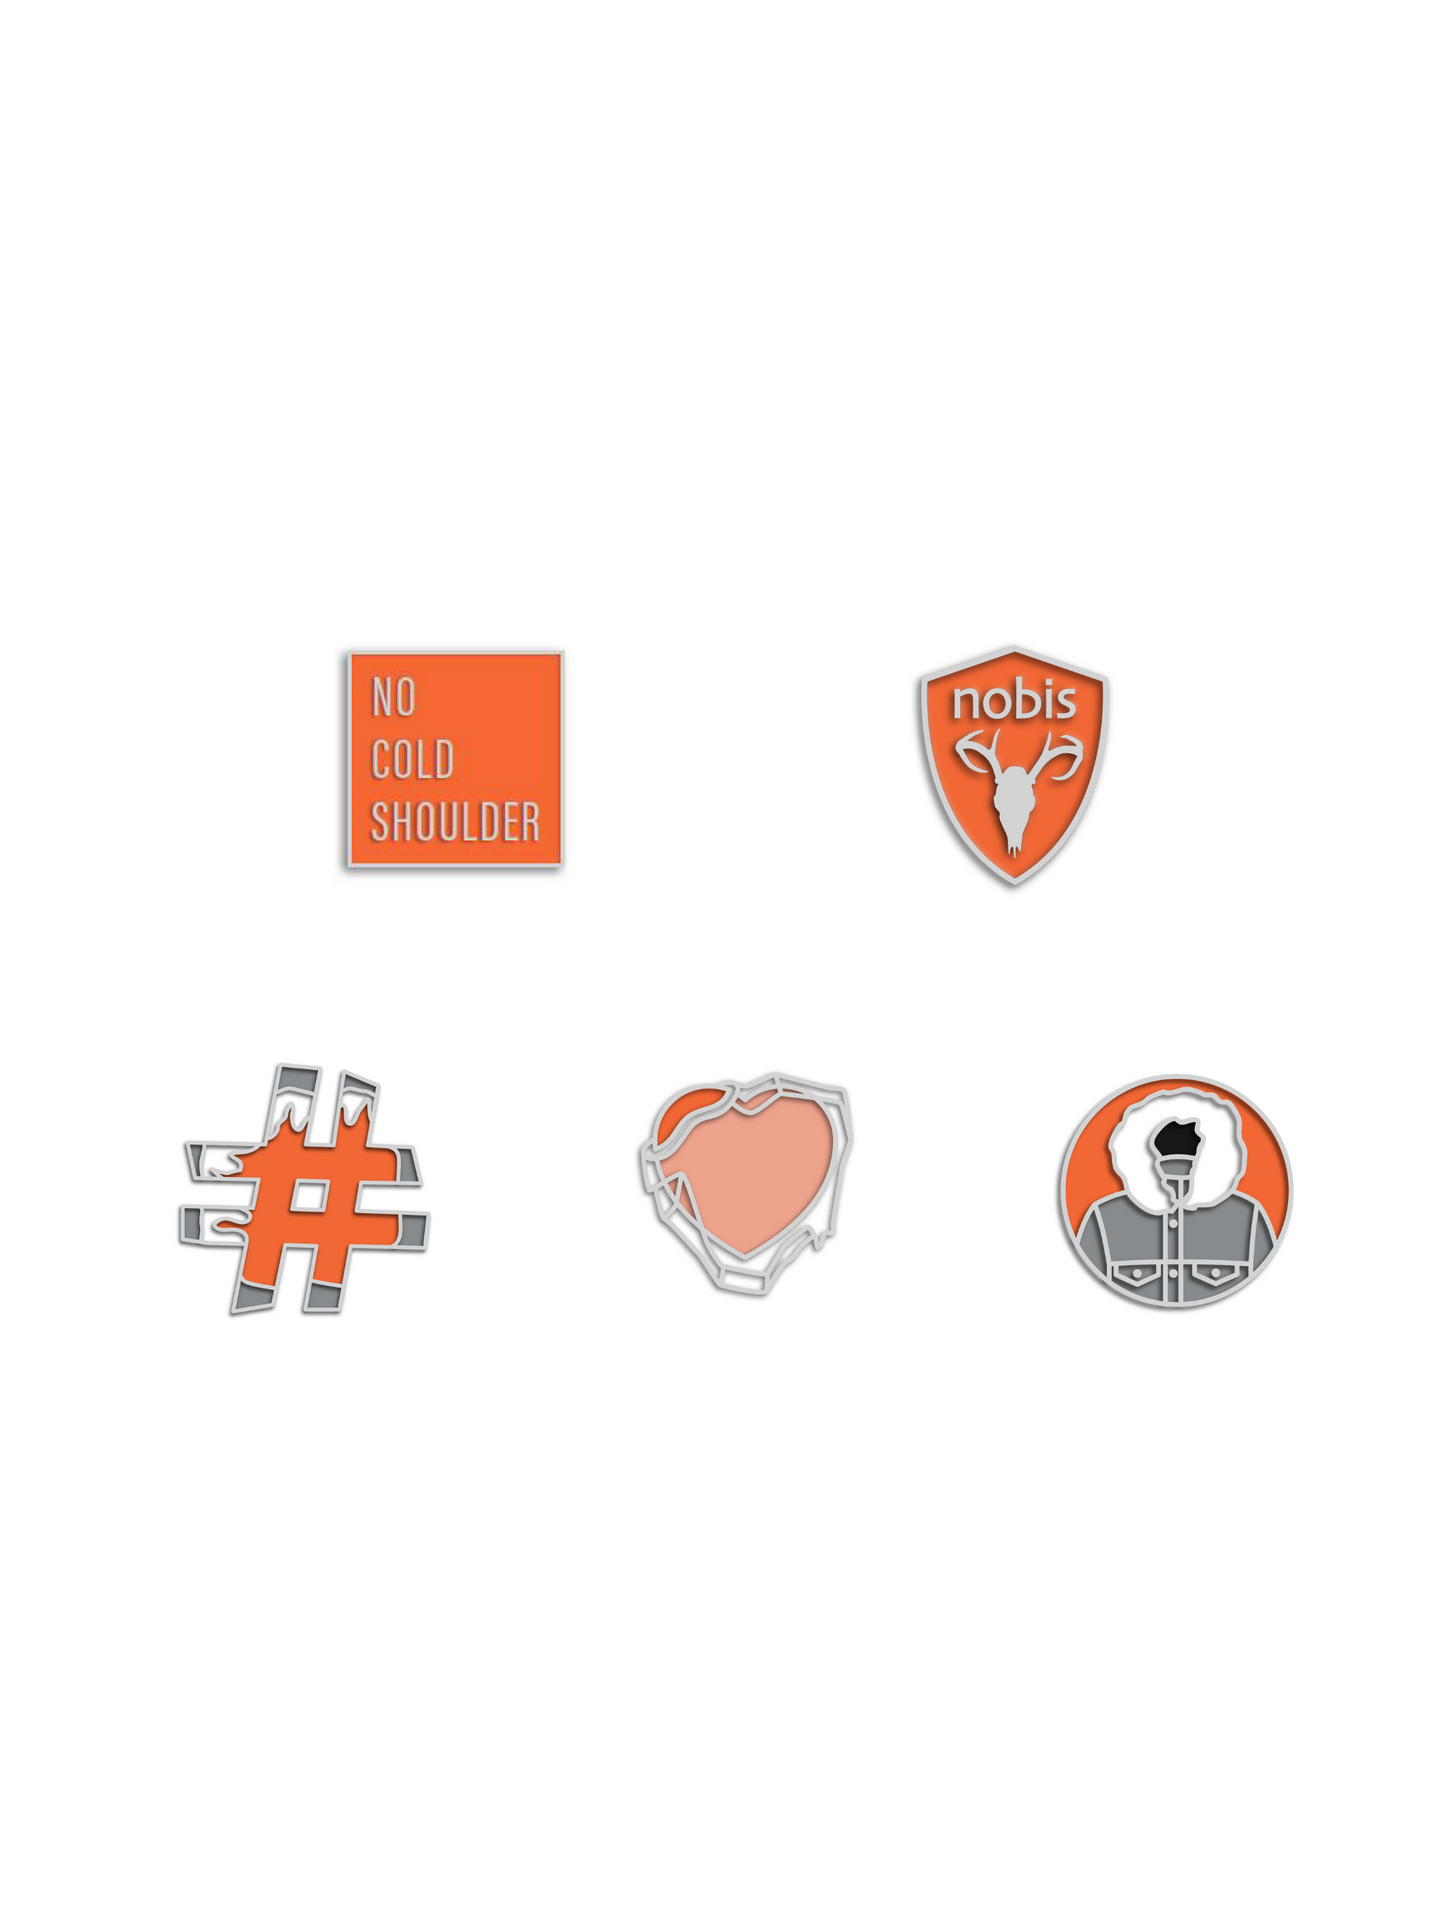 Set of five enamel pins that include an orange square with no cold shoulder printed in the center, and orange nobis logo shield, and orange and grey hashtag, an orange heart with ice over it and a orange and grey circle parka Pin Pack